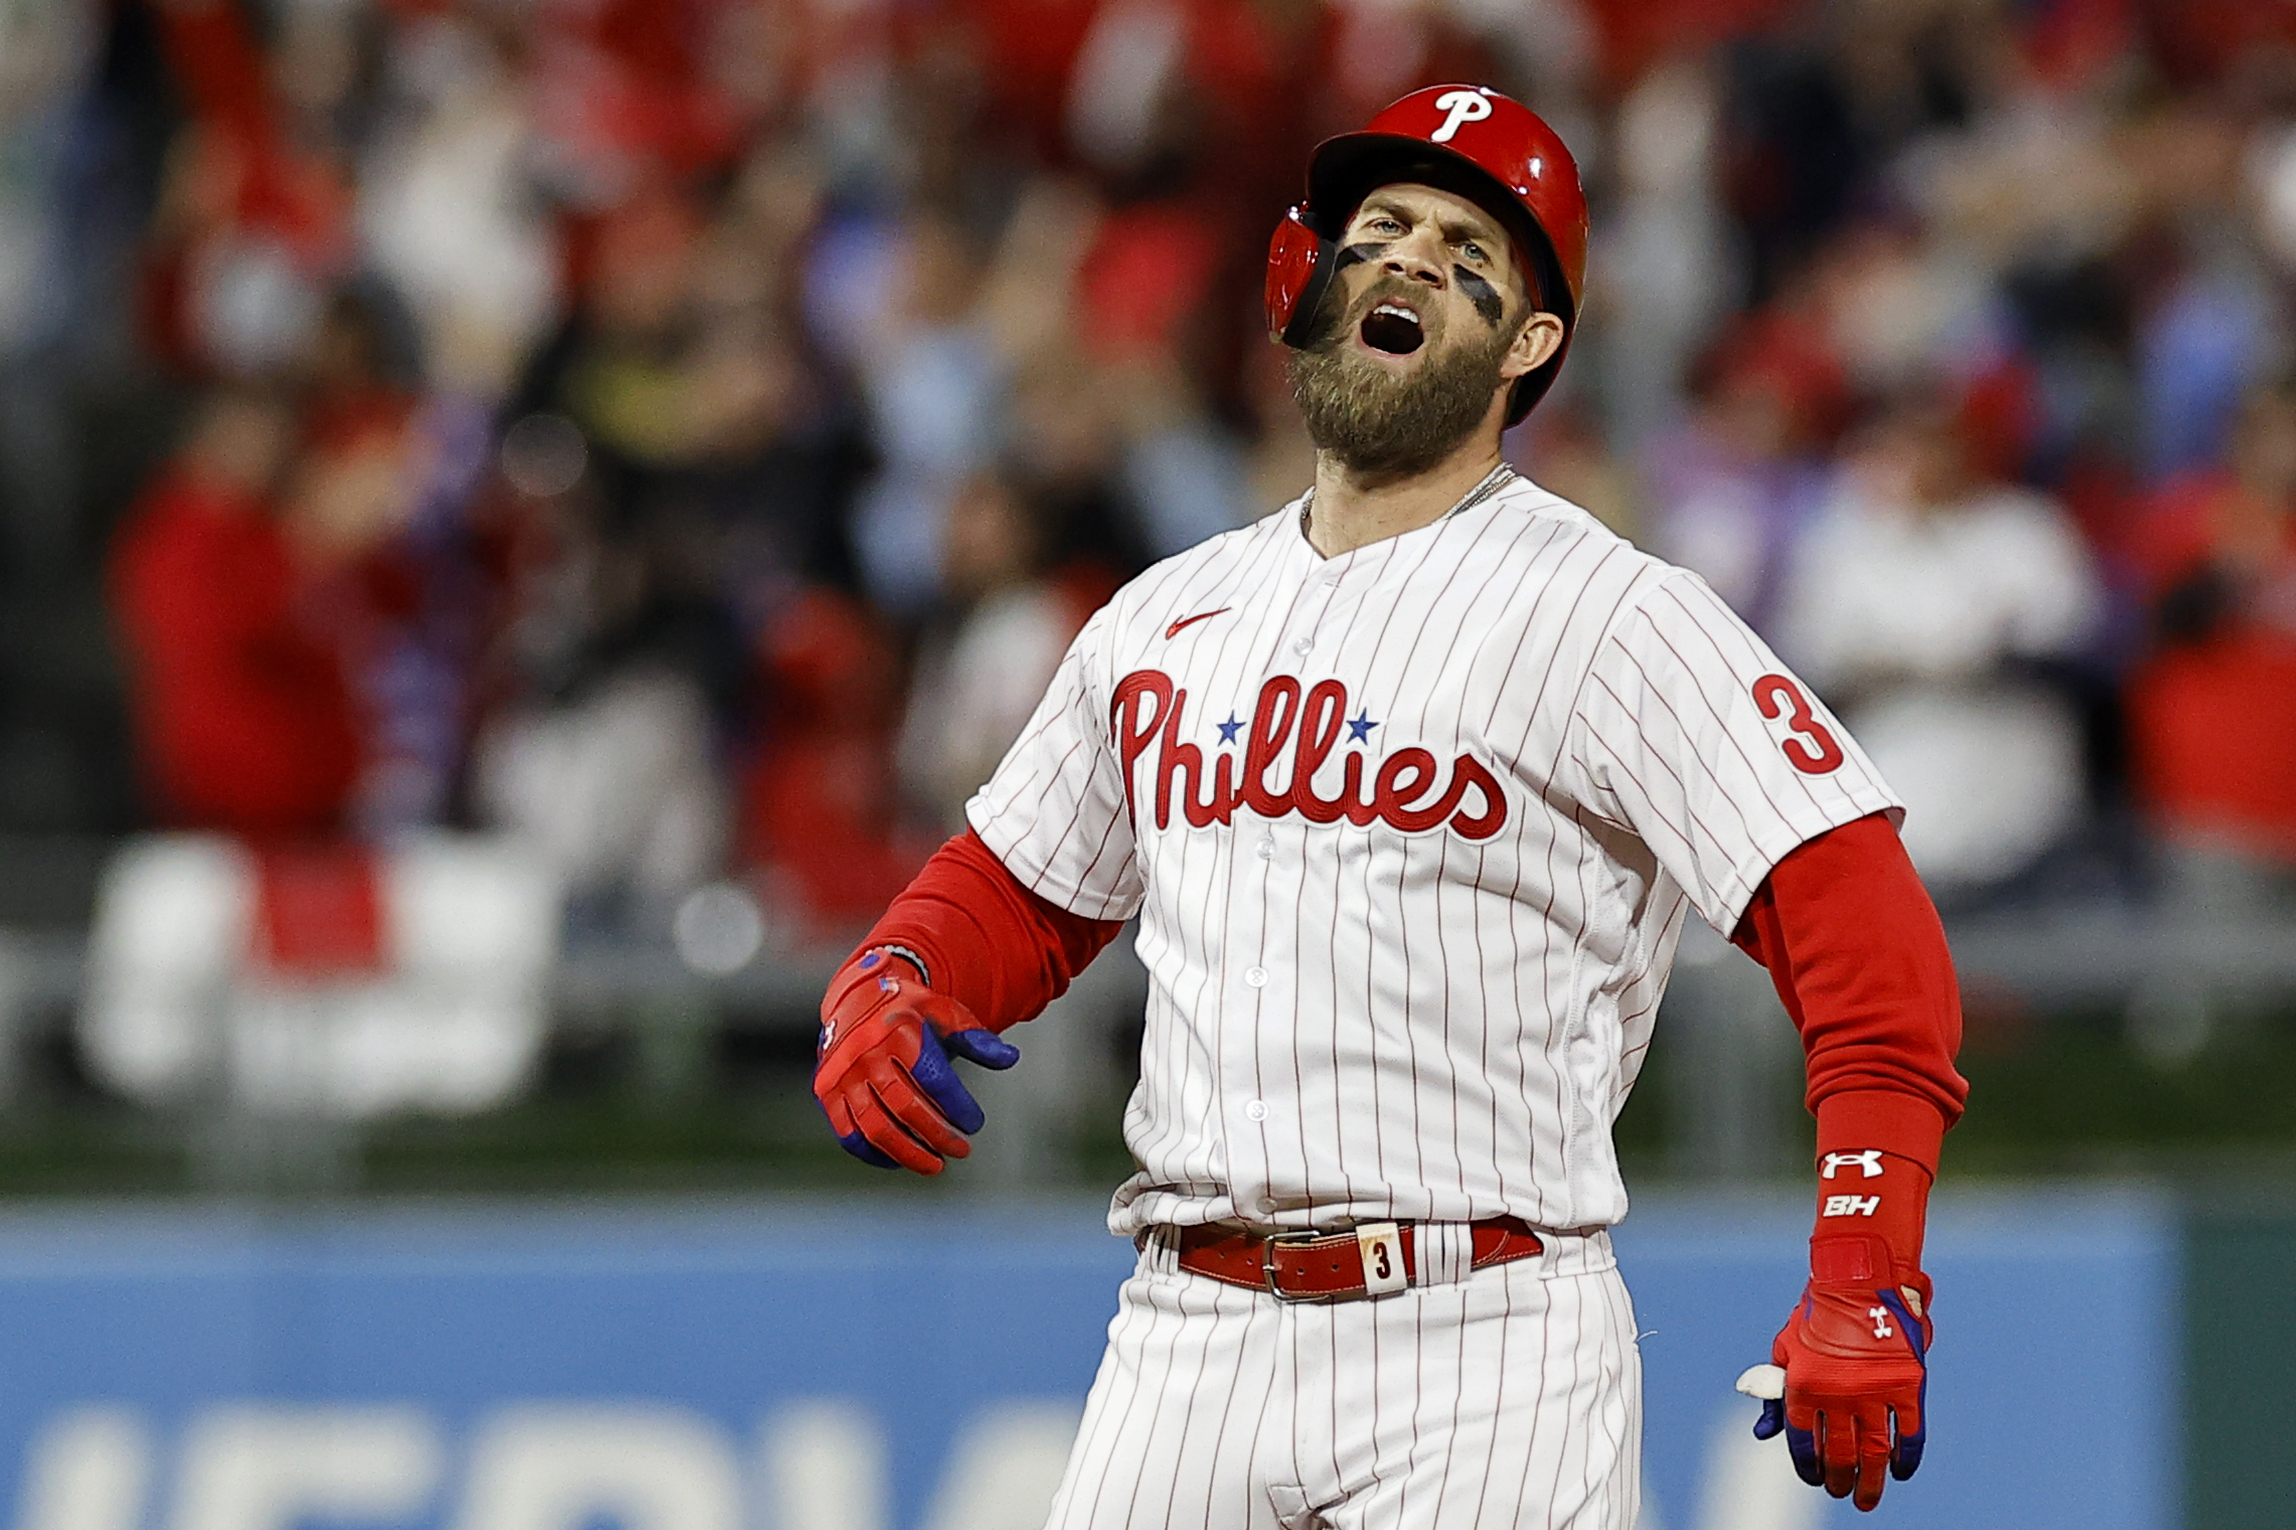 These 7 Records Show How Great Bryce Harper is - Pro Sports Outlook